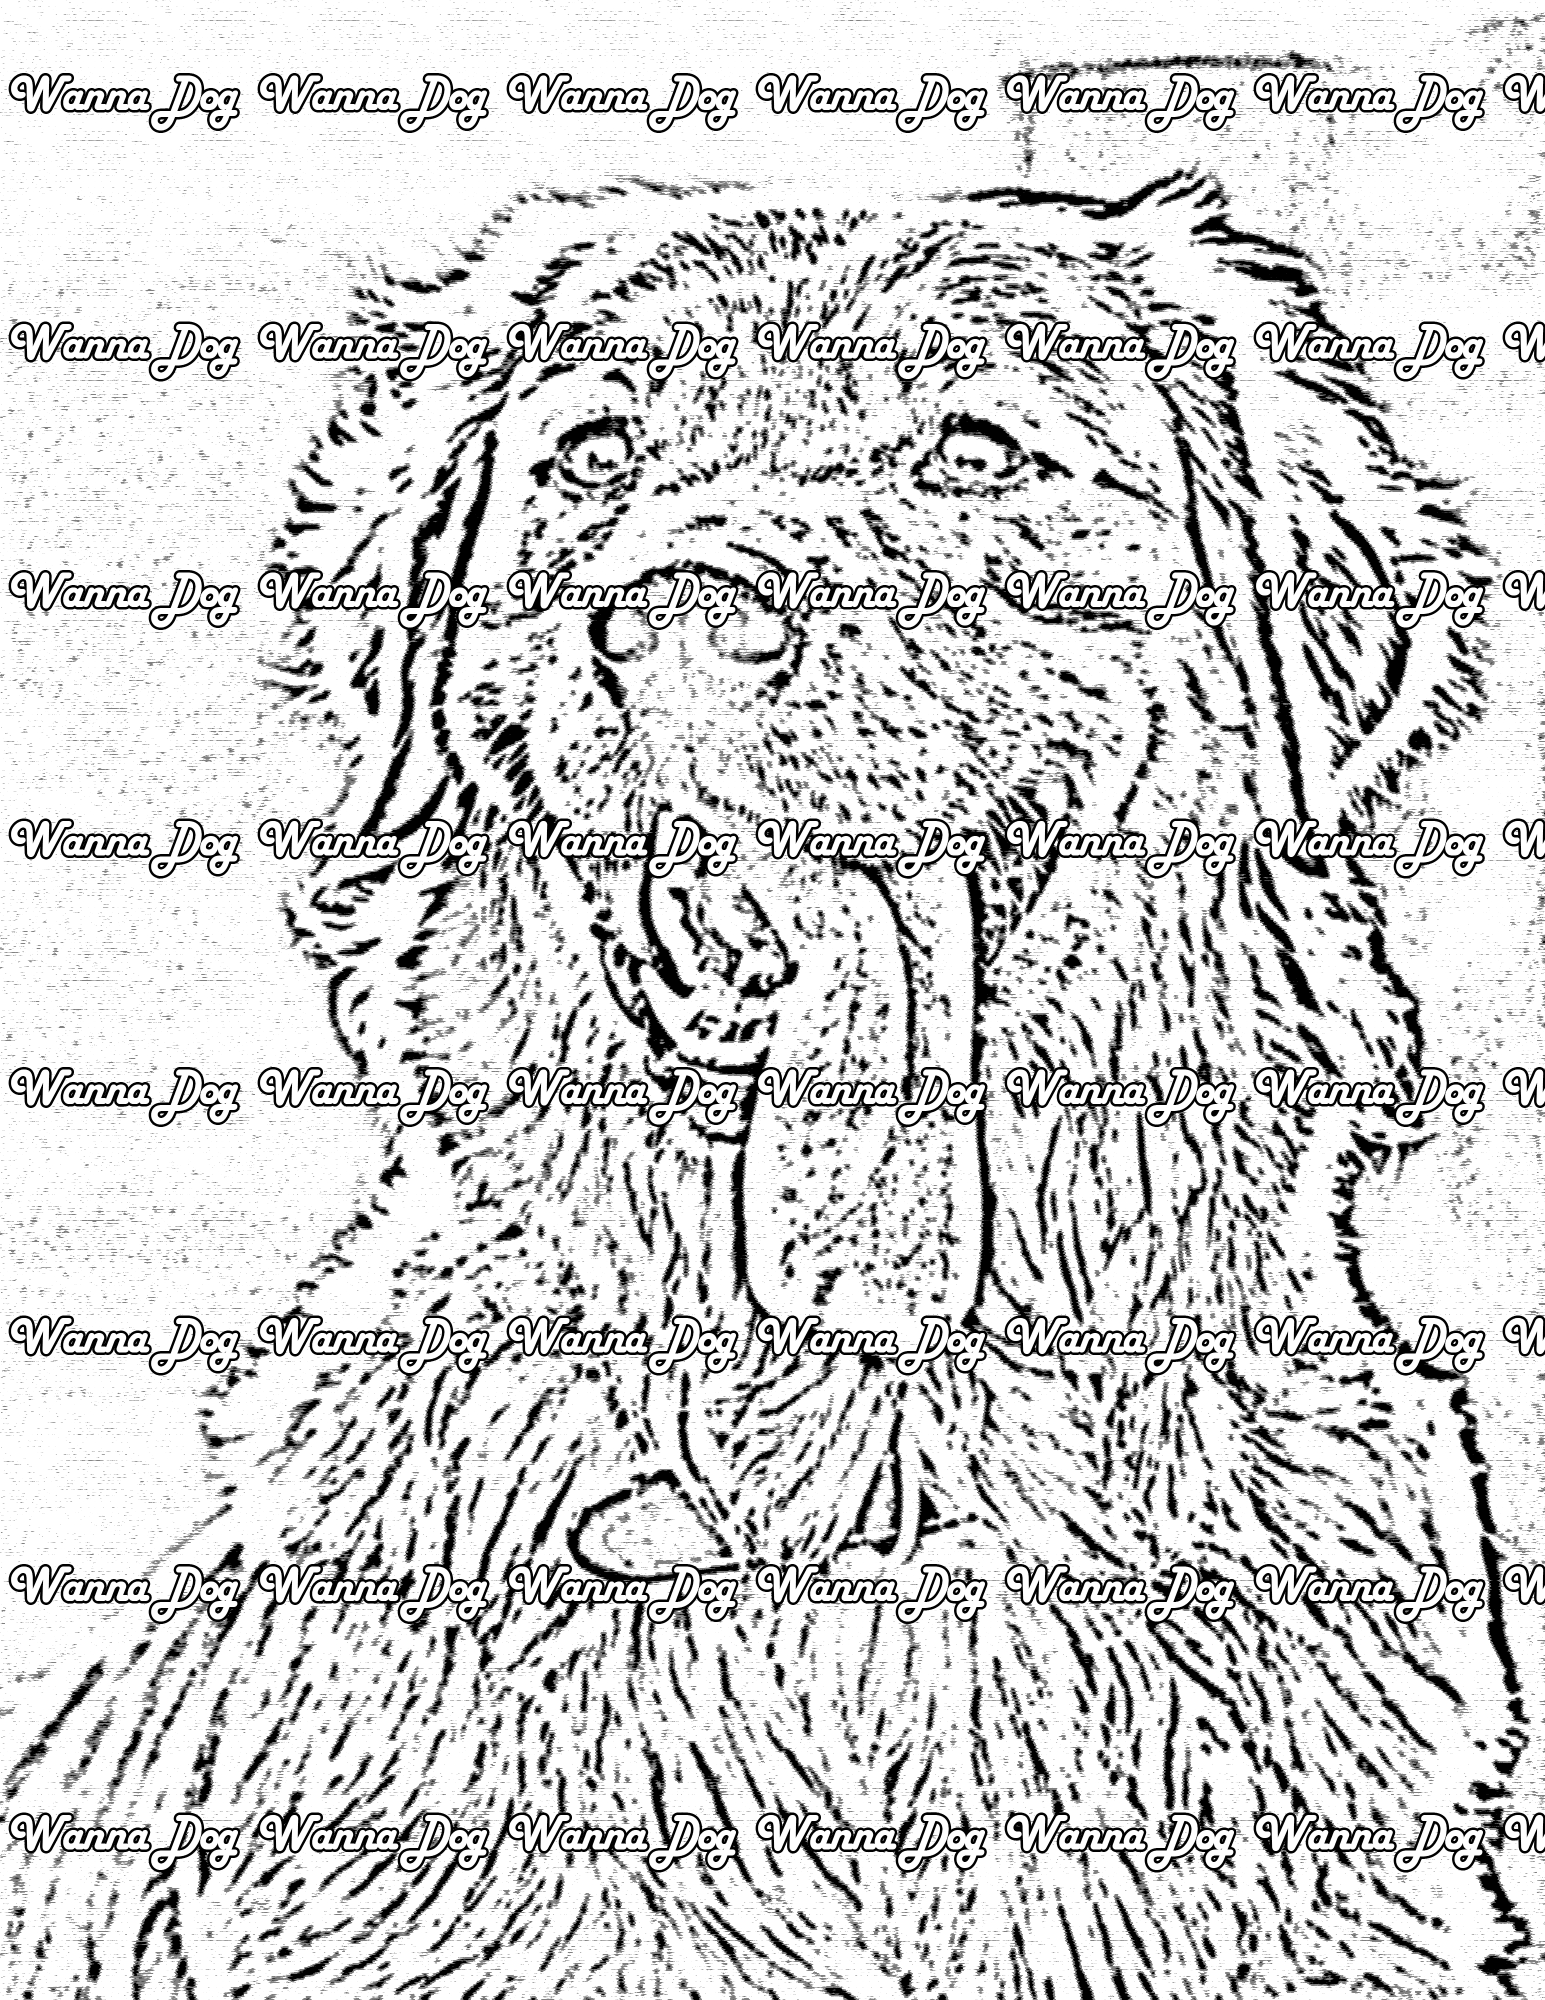 Golden Retriever Coloring Page of a Golden Retriever with a tongue hanging out